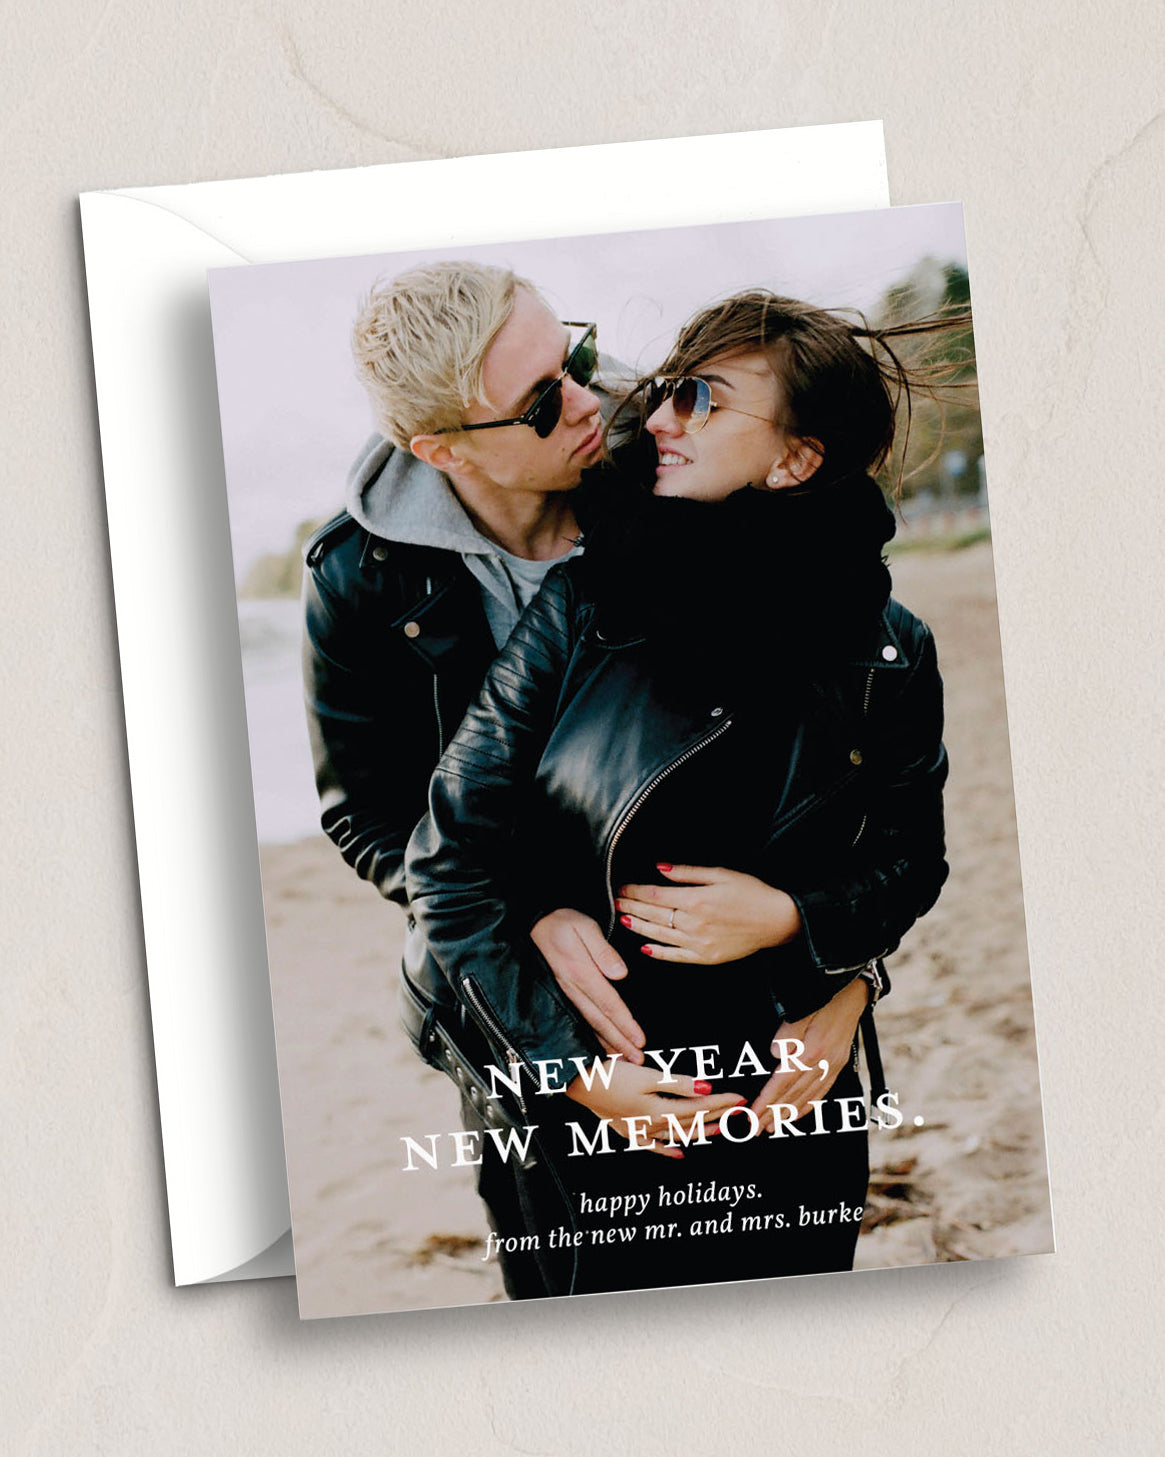 New Year, New Memories Photo Card from Leighwood Design Studio